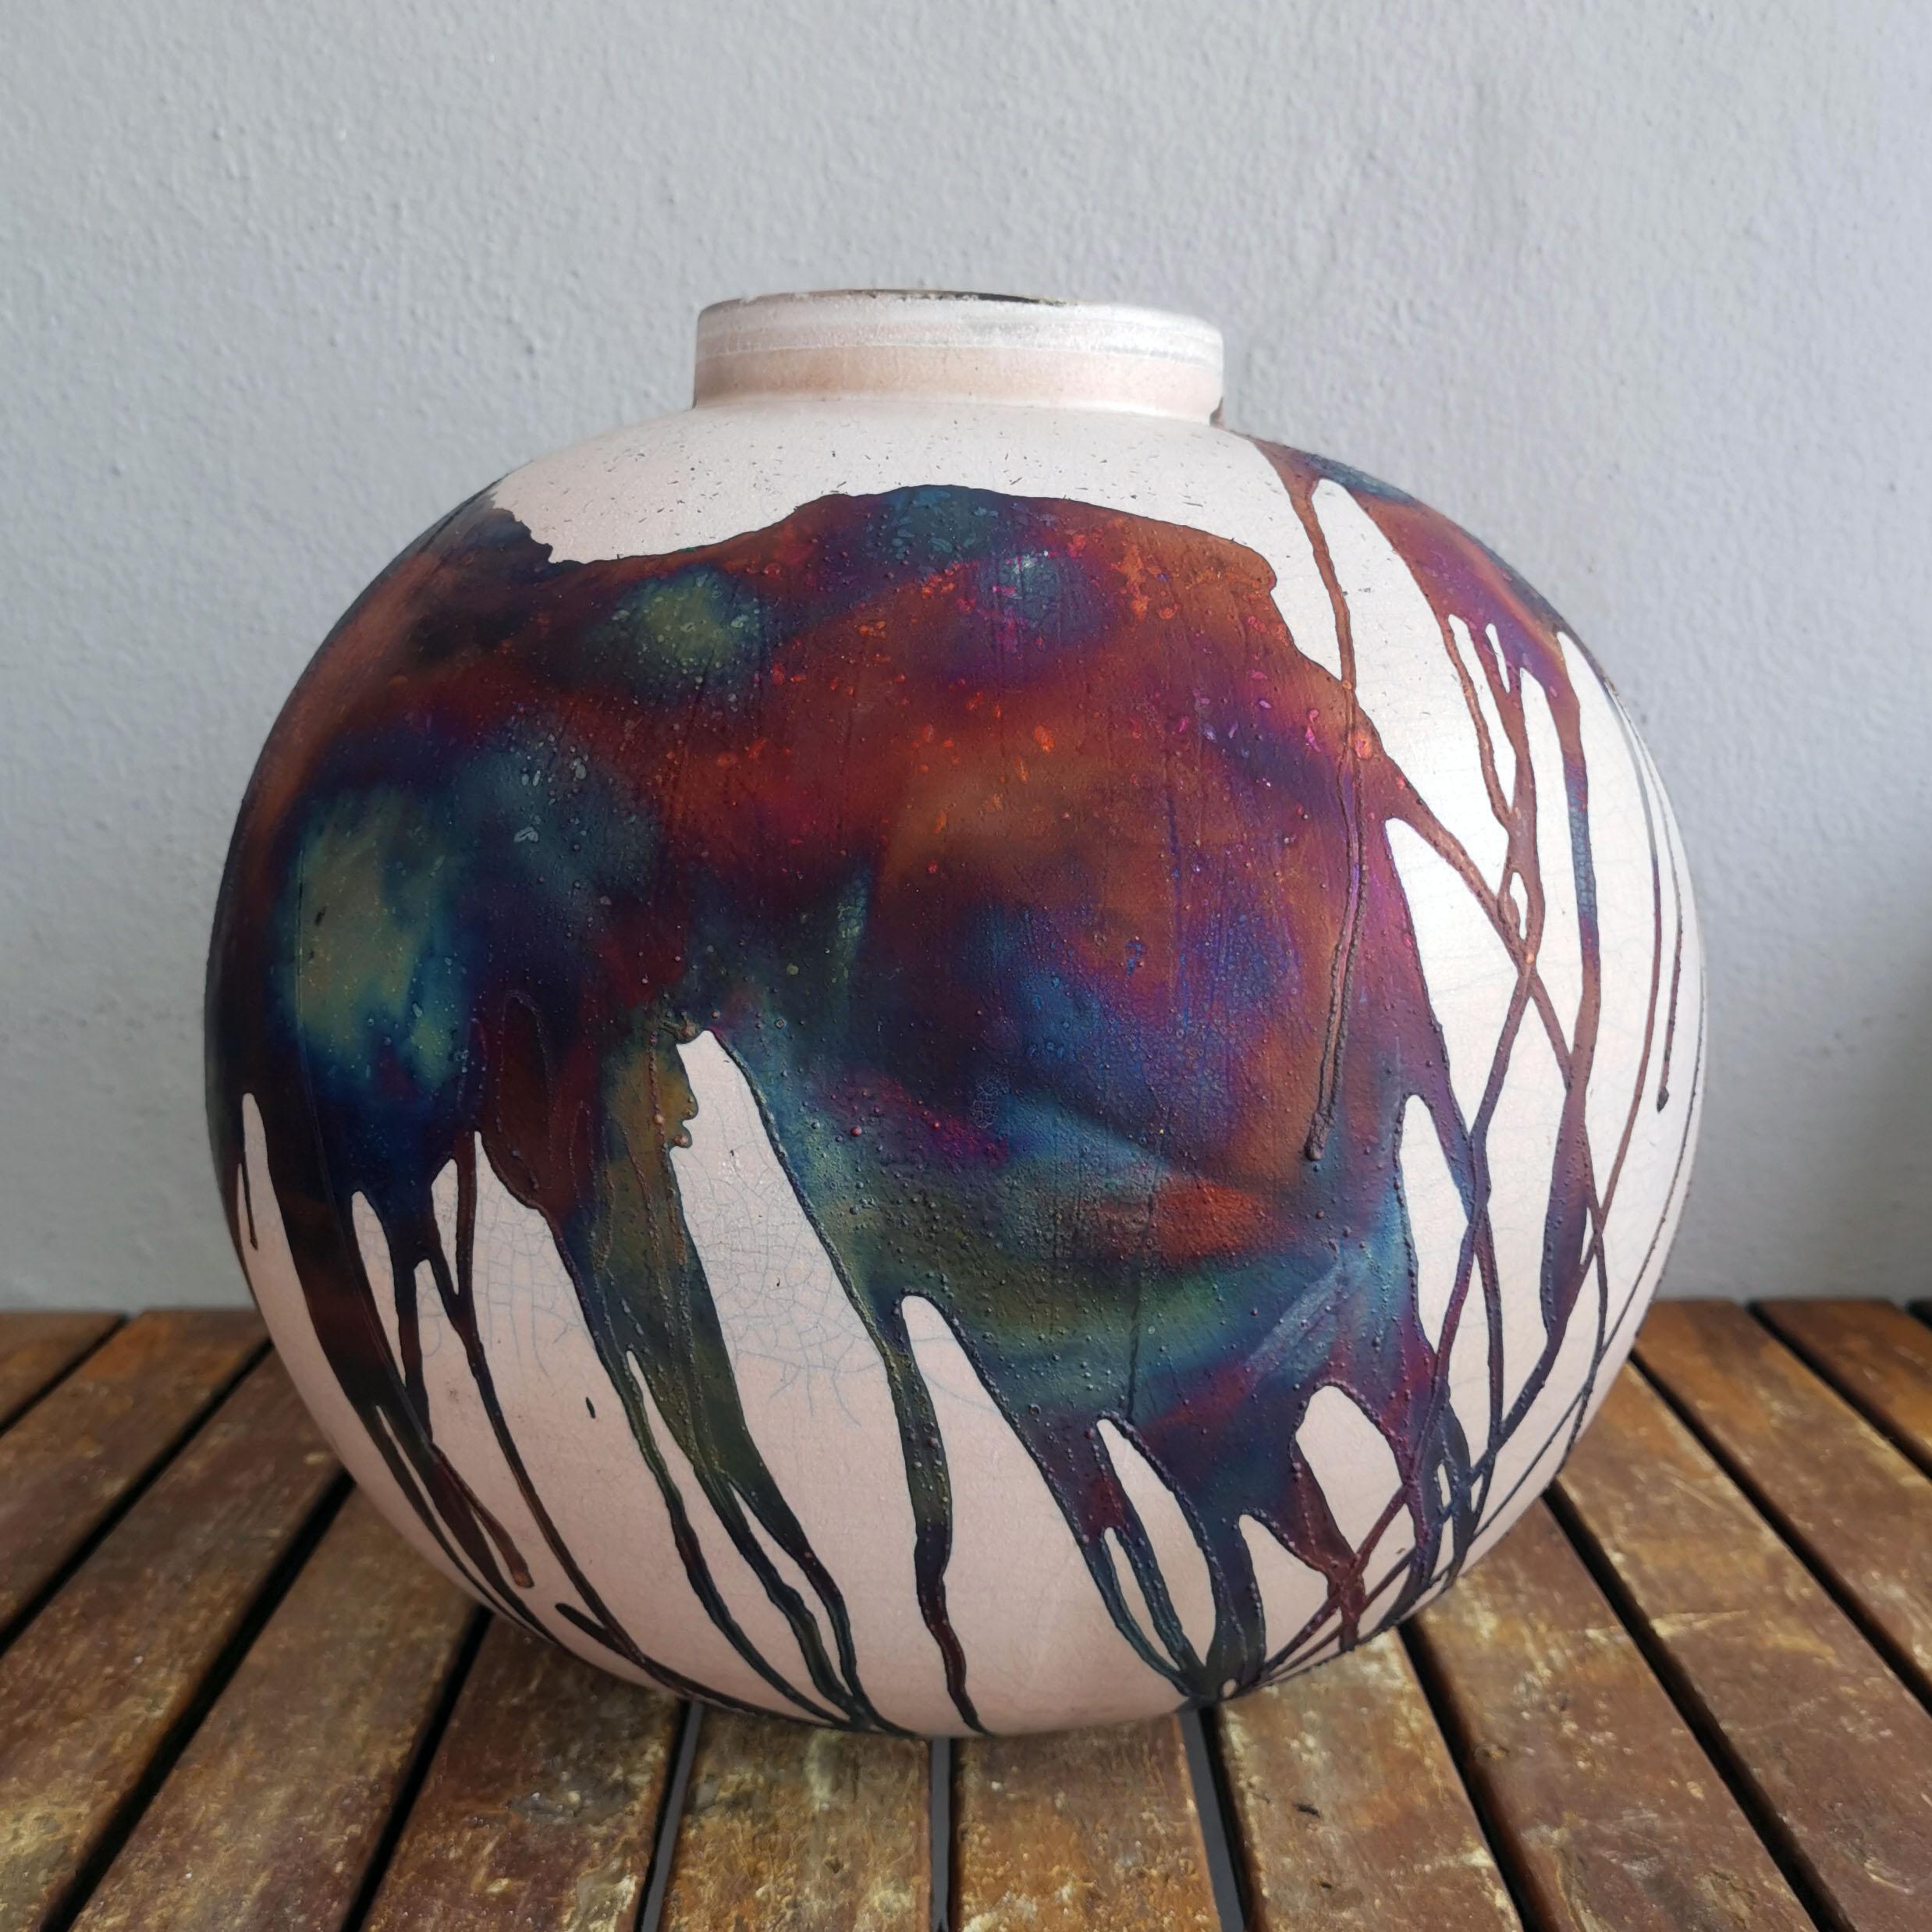 A mesmerizing sight to behold as soon as the rainbow-like patinas catch your eye. This Globe XL Vase is a round, capacious piece produced using the Raku technique, resulting in a beautiful unpredictable finish. This vase would be the perfect